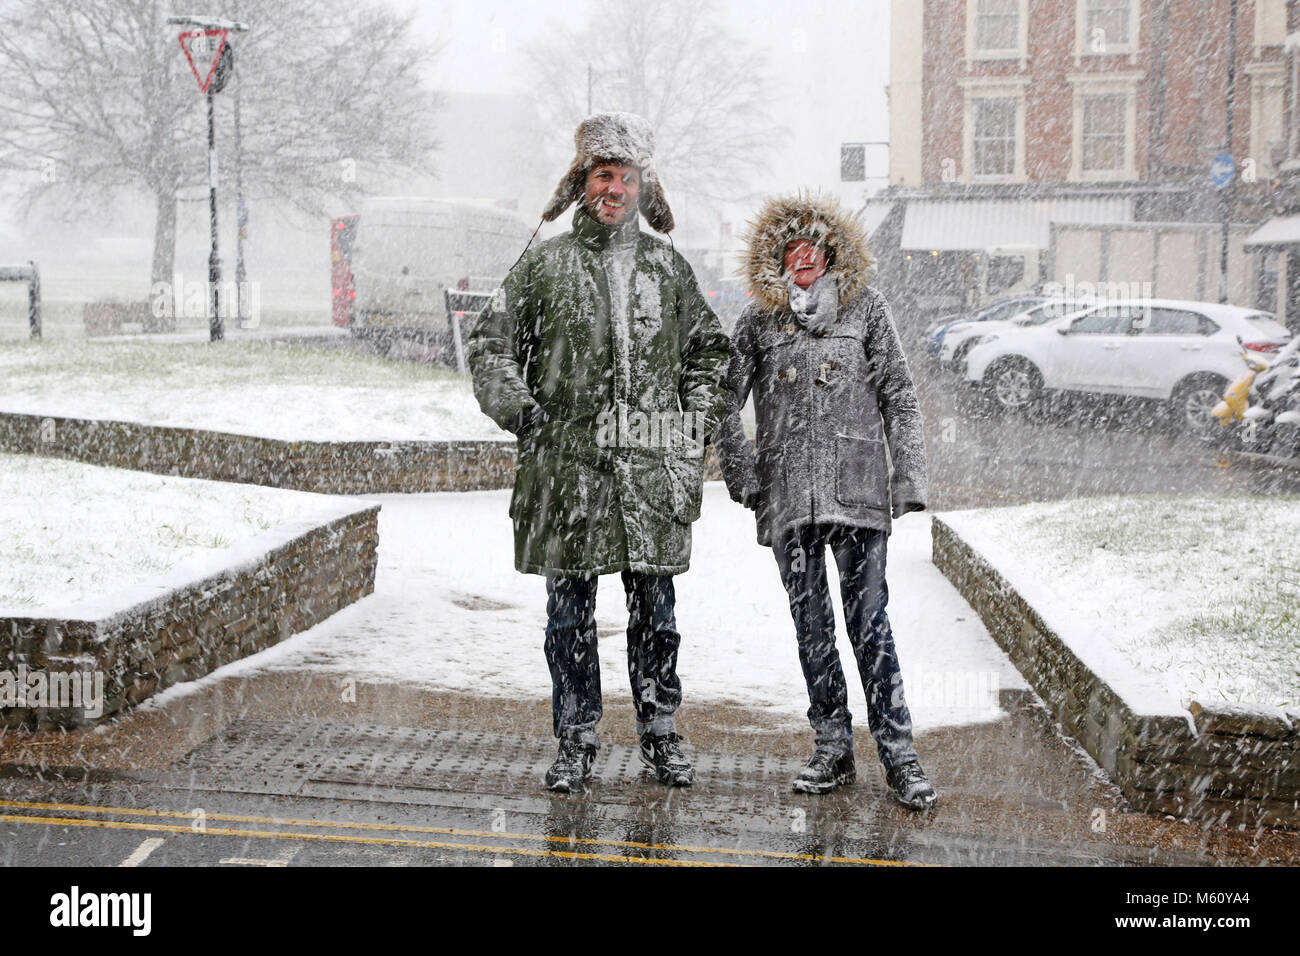 London, UK. 27th February 2018. David and Christine were well prepared and dressed for the cold during snowy weather conditions in Blackheath, London Credit: Paul Brown/Alamy Live News Stock Photo